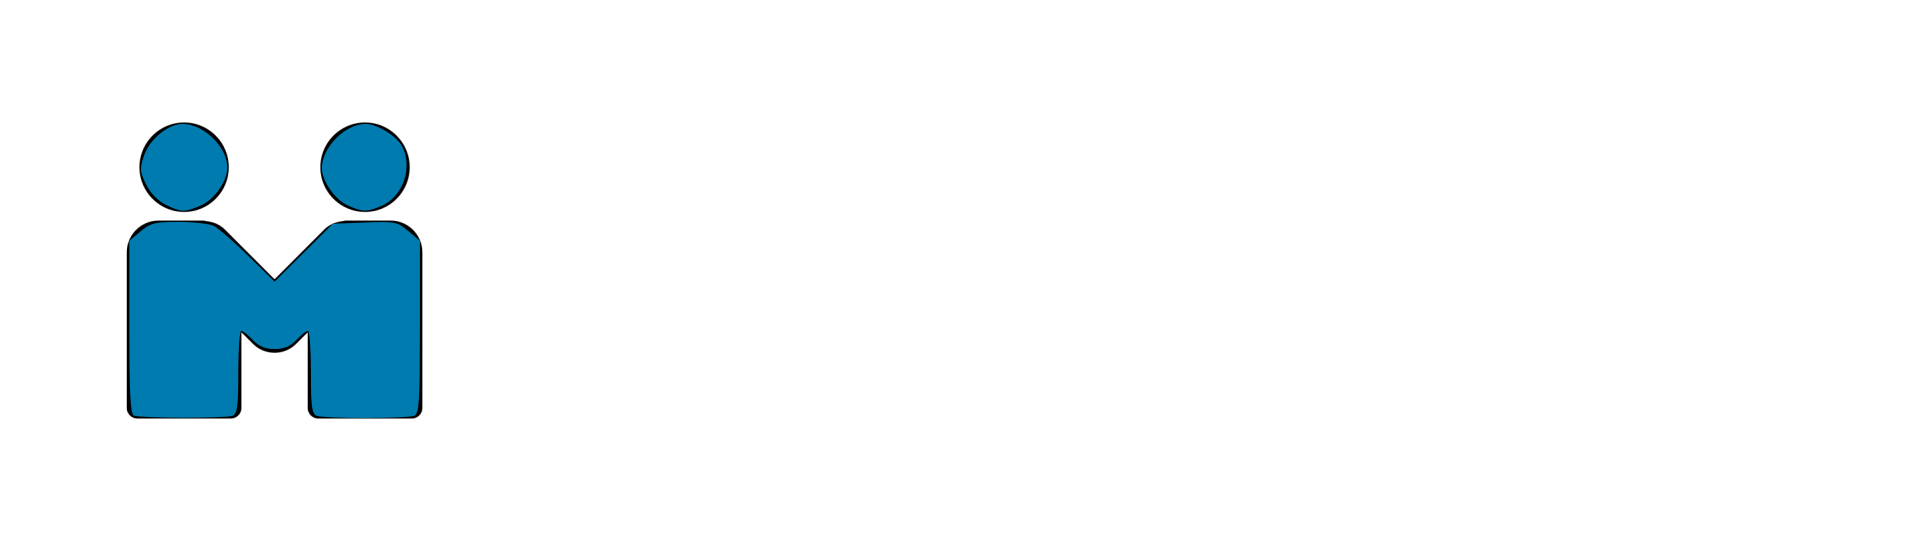 Modaat Logo - Memories One Day At A Time